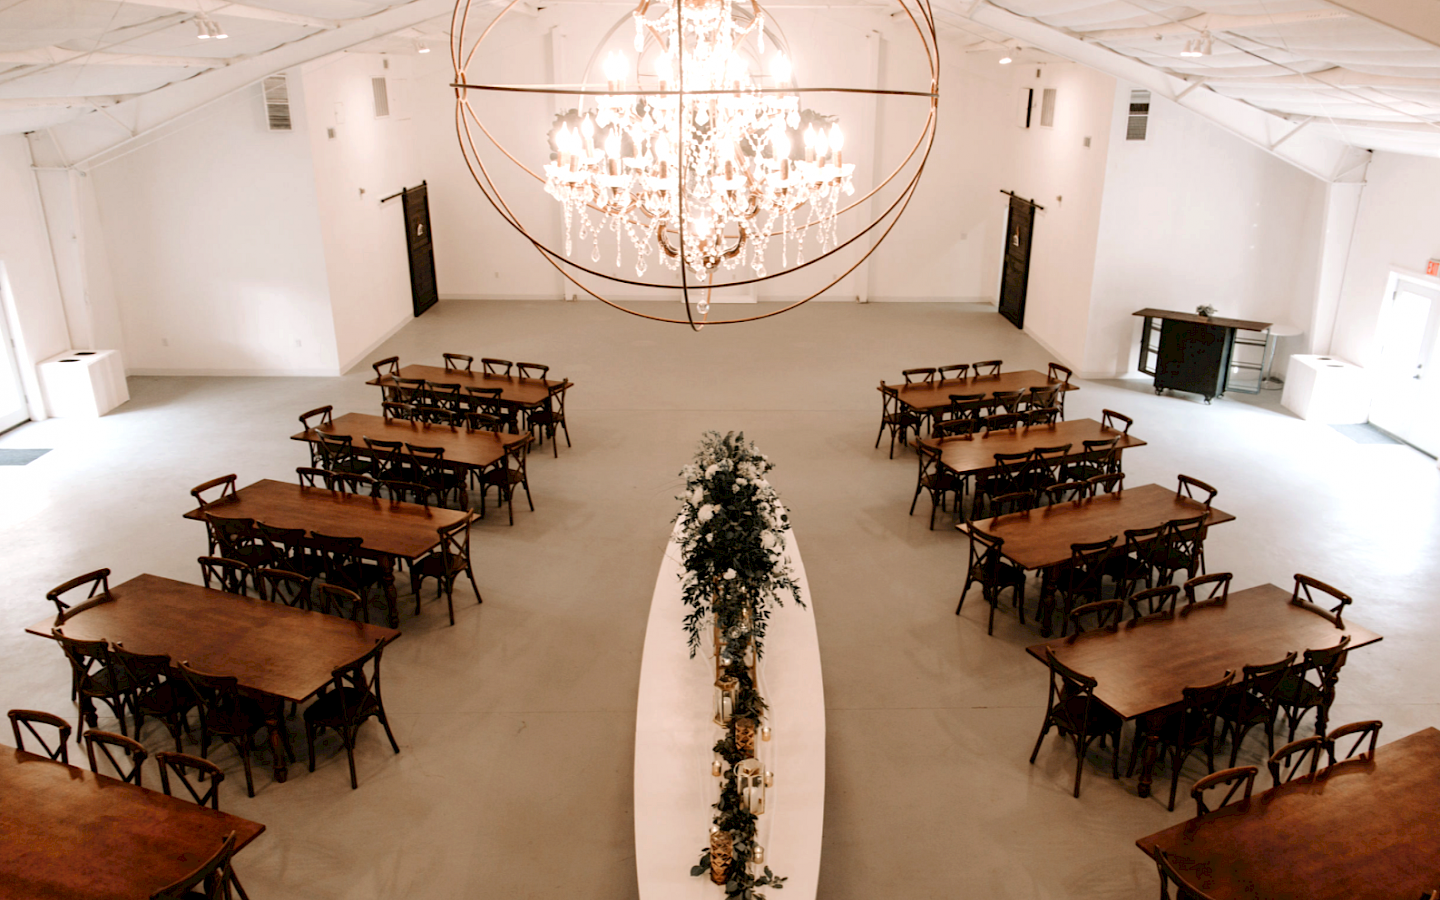 inside of a building, decorated with formal chairs and tables